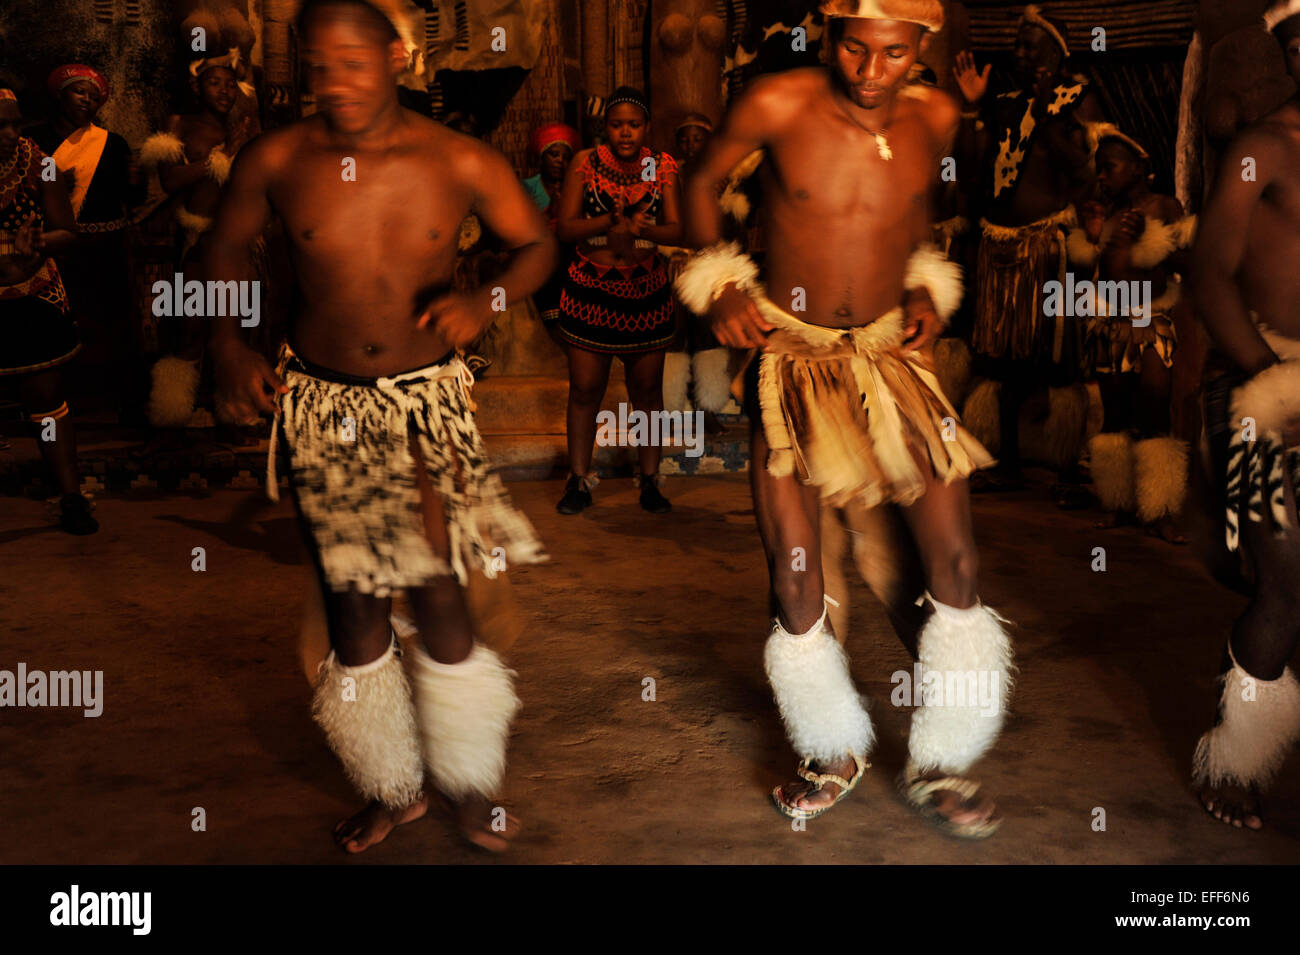 Adult male dancers in traditional Zulu warrior dress performing a war dance at cultural entertainment event for tourists, Shakaland, KwaZulu-Natal Stock Photo